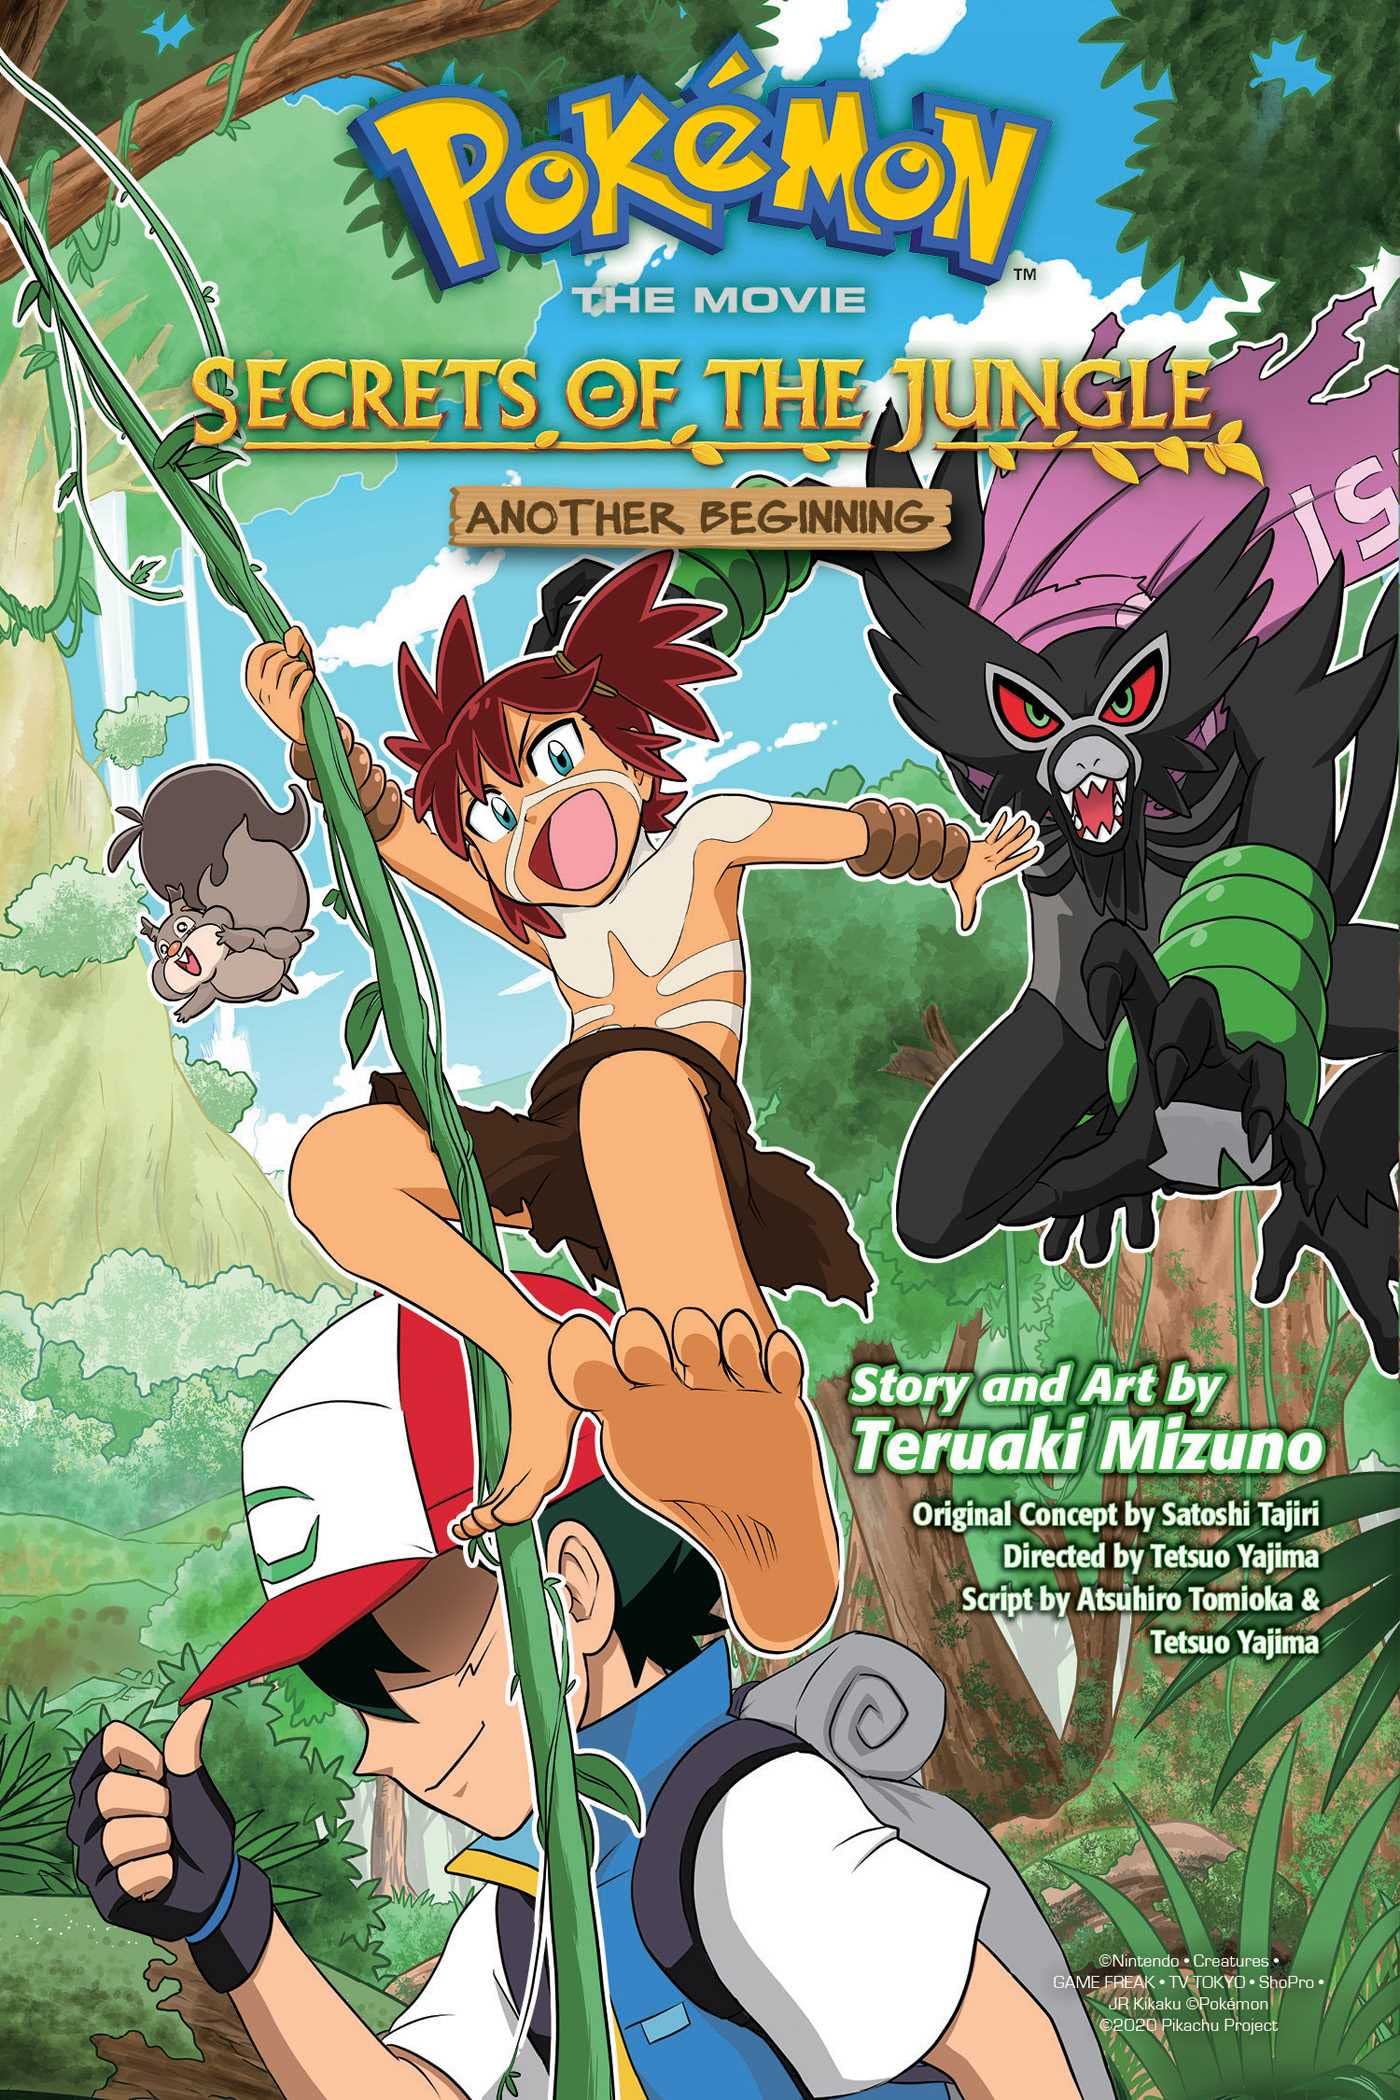 Pokémon the Movie: Secrets of the Jungle, Another Beginning